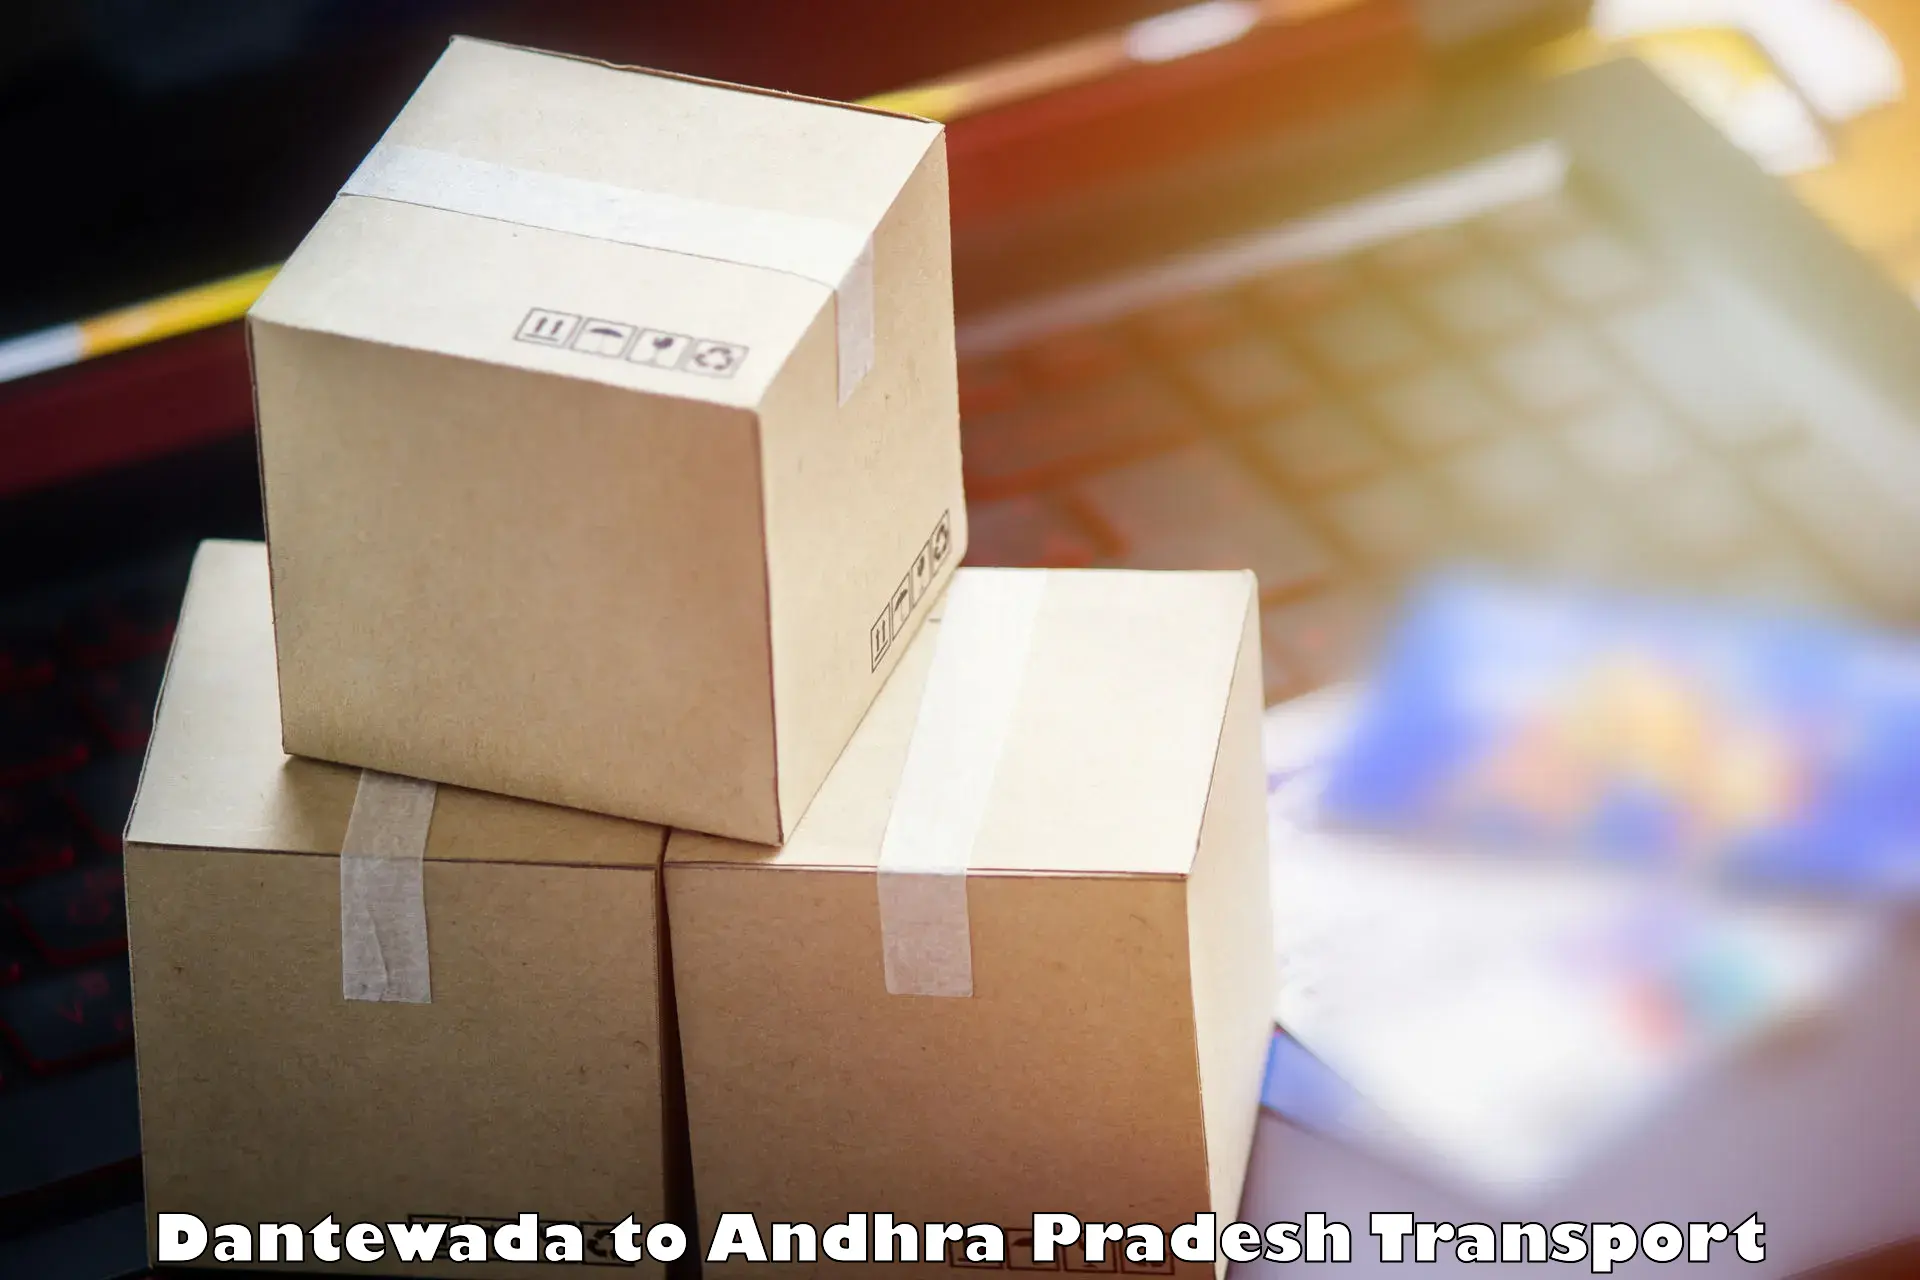 Road transport online services Dantewada to Ongole